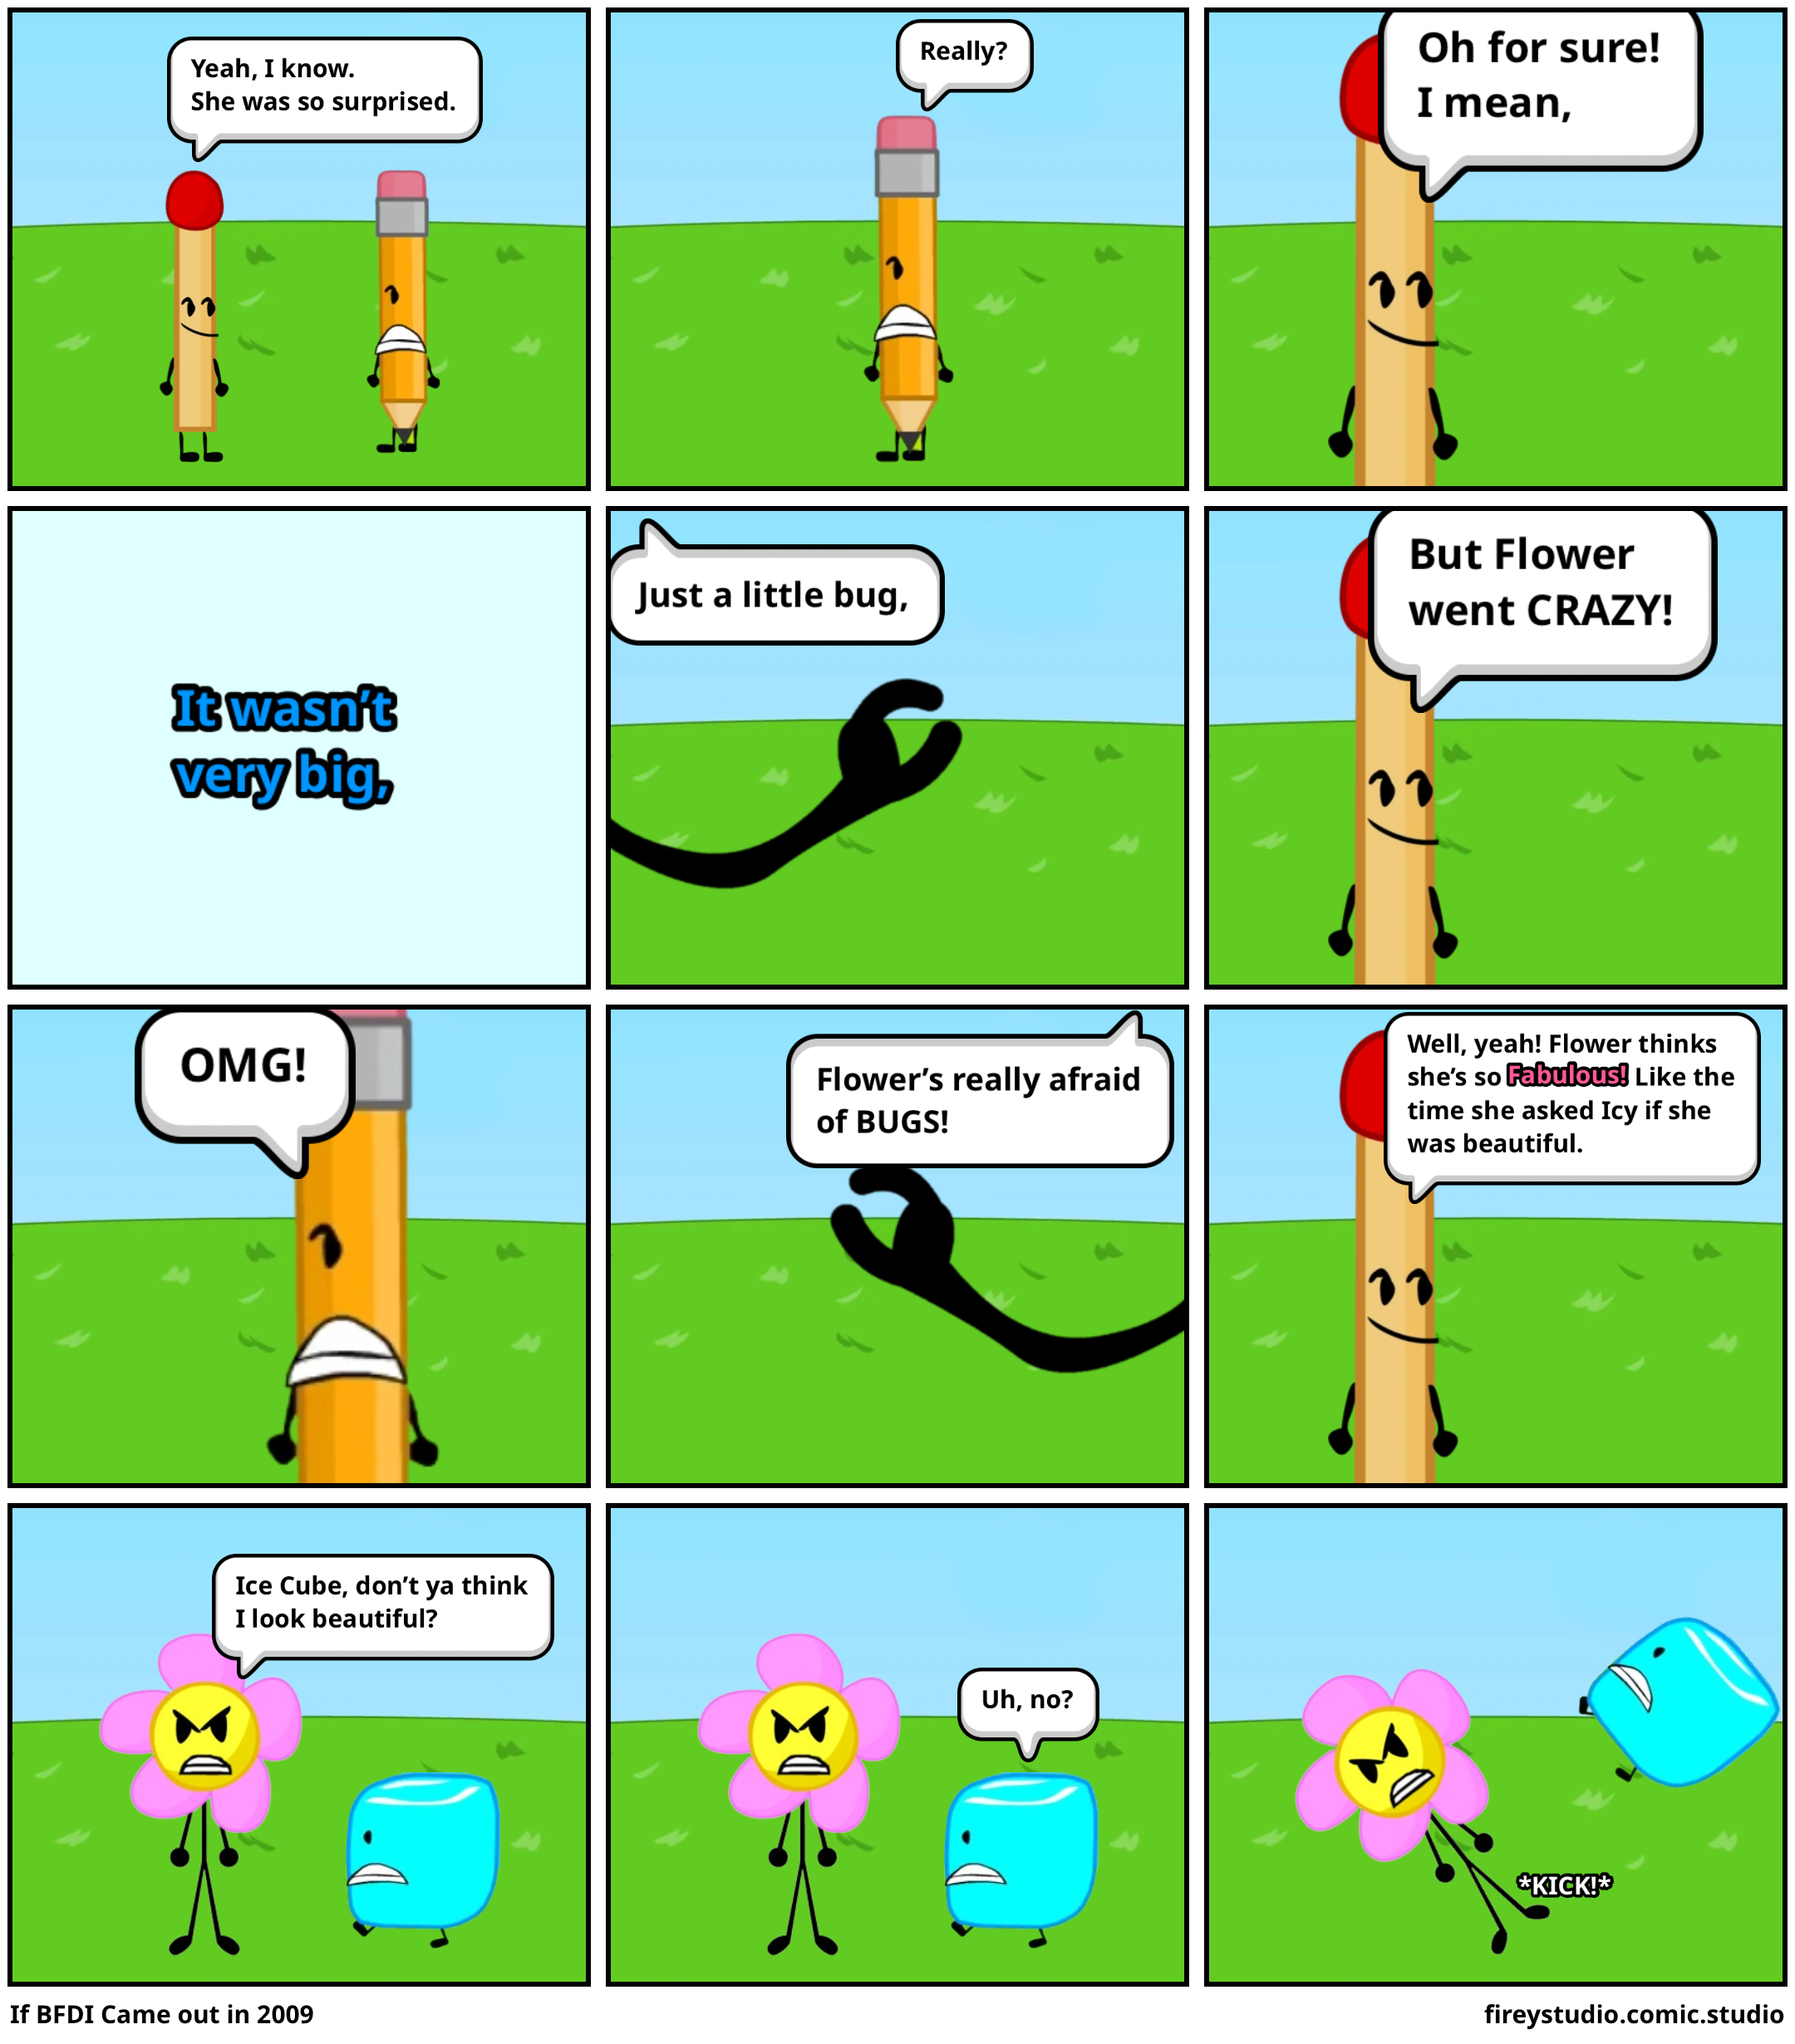 If BFDI Came out in 2009